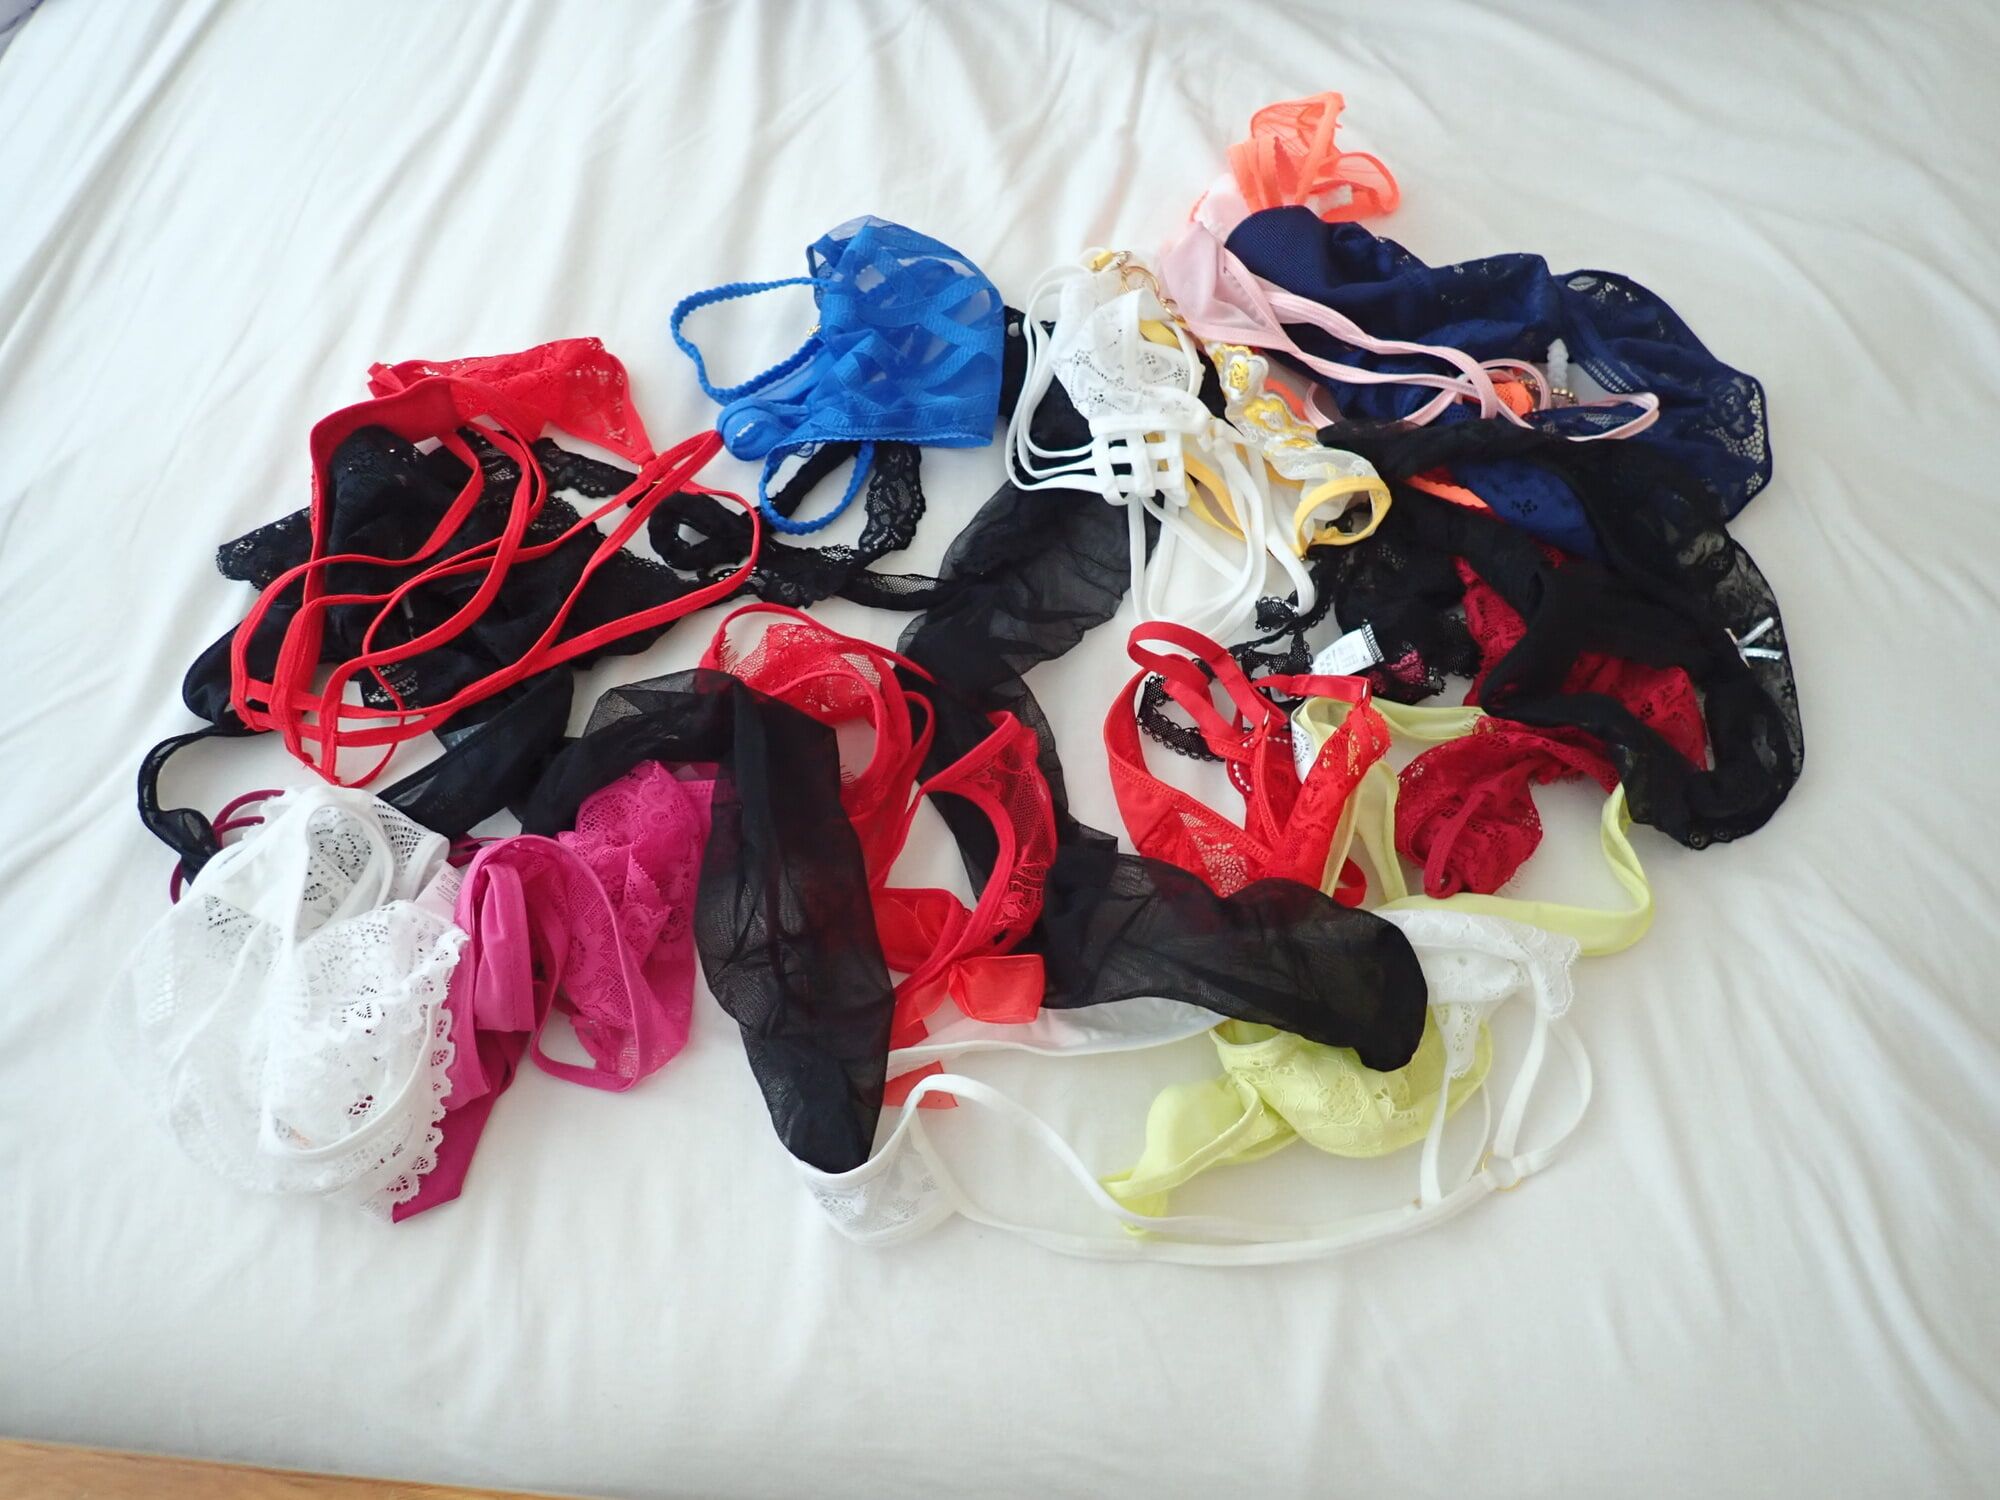 my knicker collection is getting bigger #8